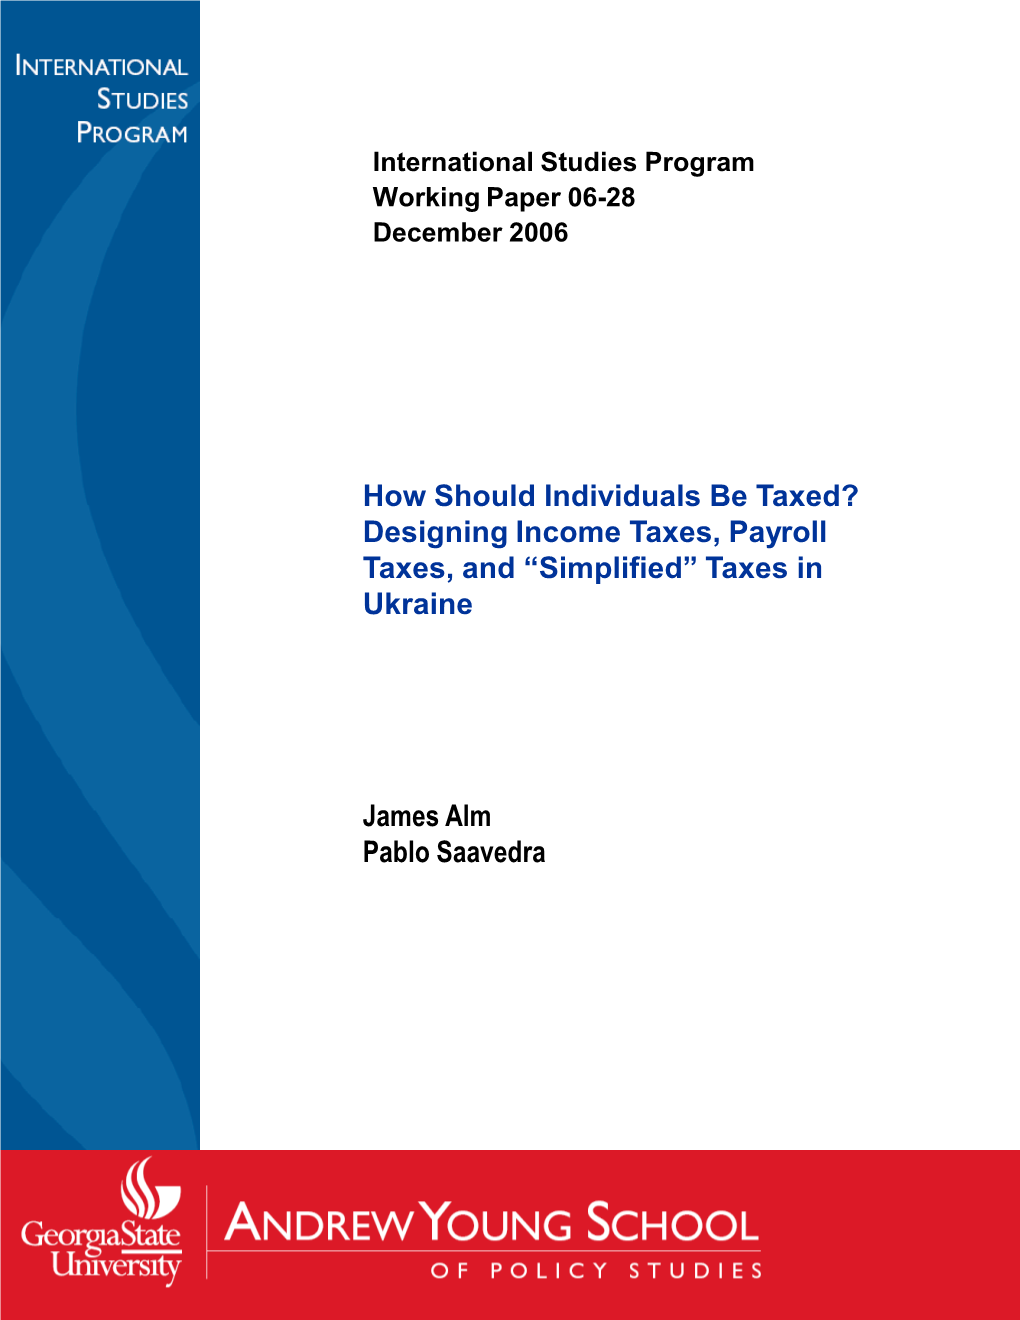 Designing Income Taxes, Payroll Taxes, and “Simplified” Taxes in Ukraine